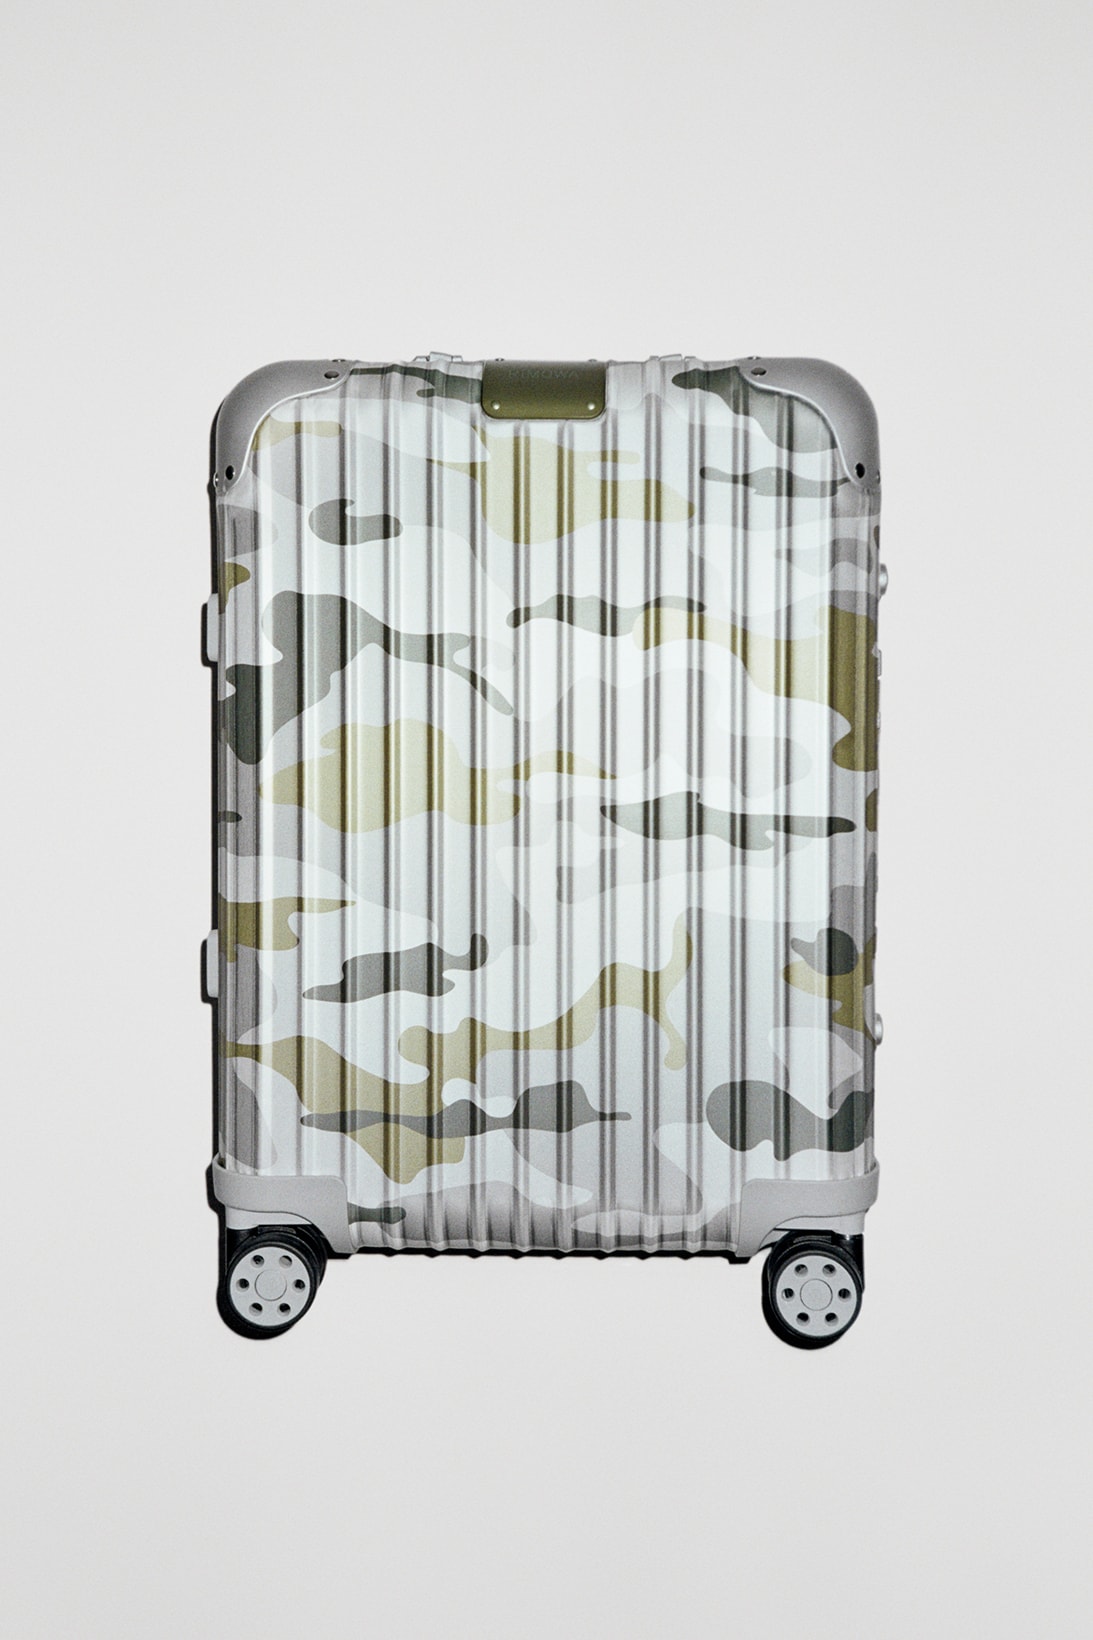 rimowa original aluminium suitcase luggage camouflage limited edition cabin green pink colorway